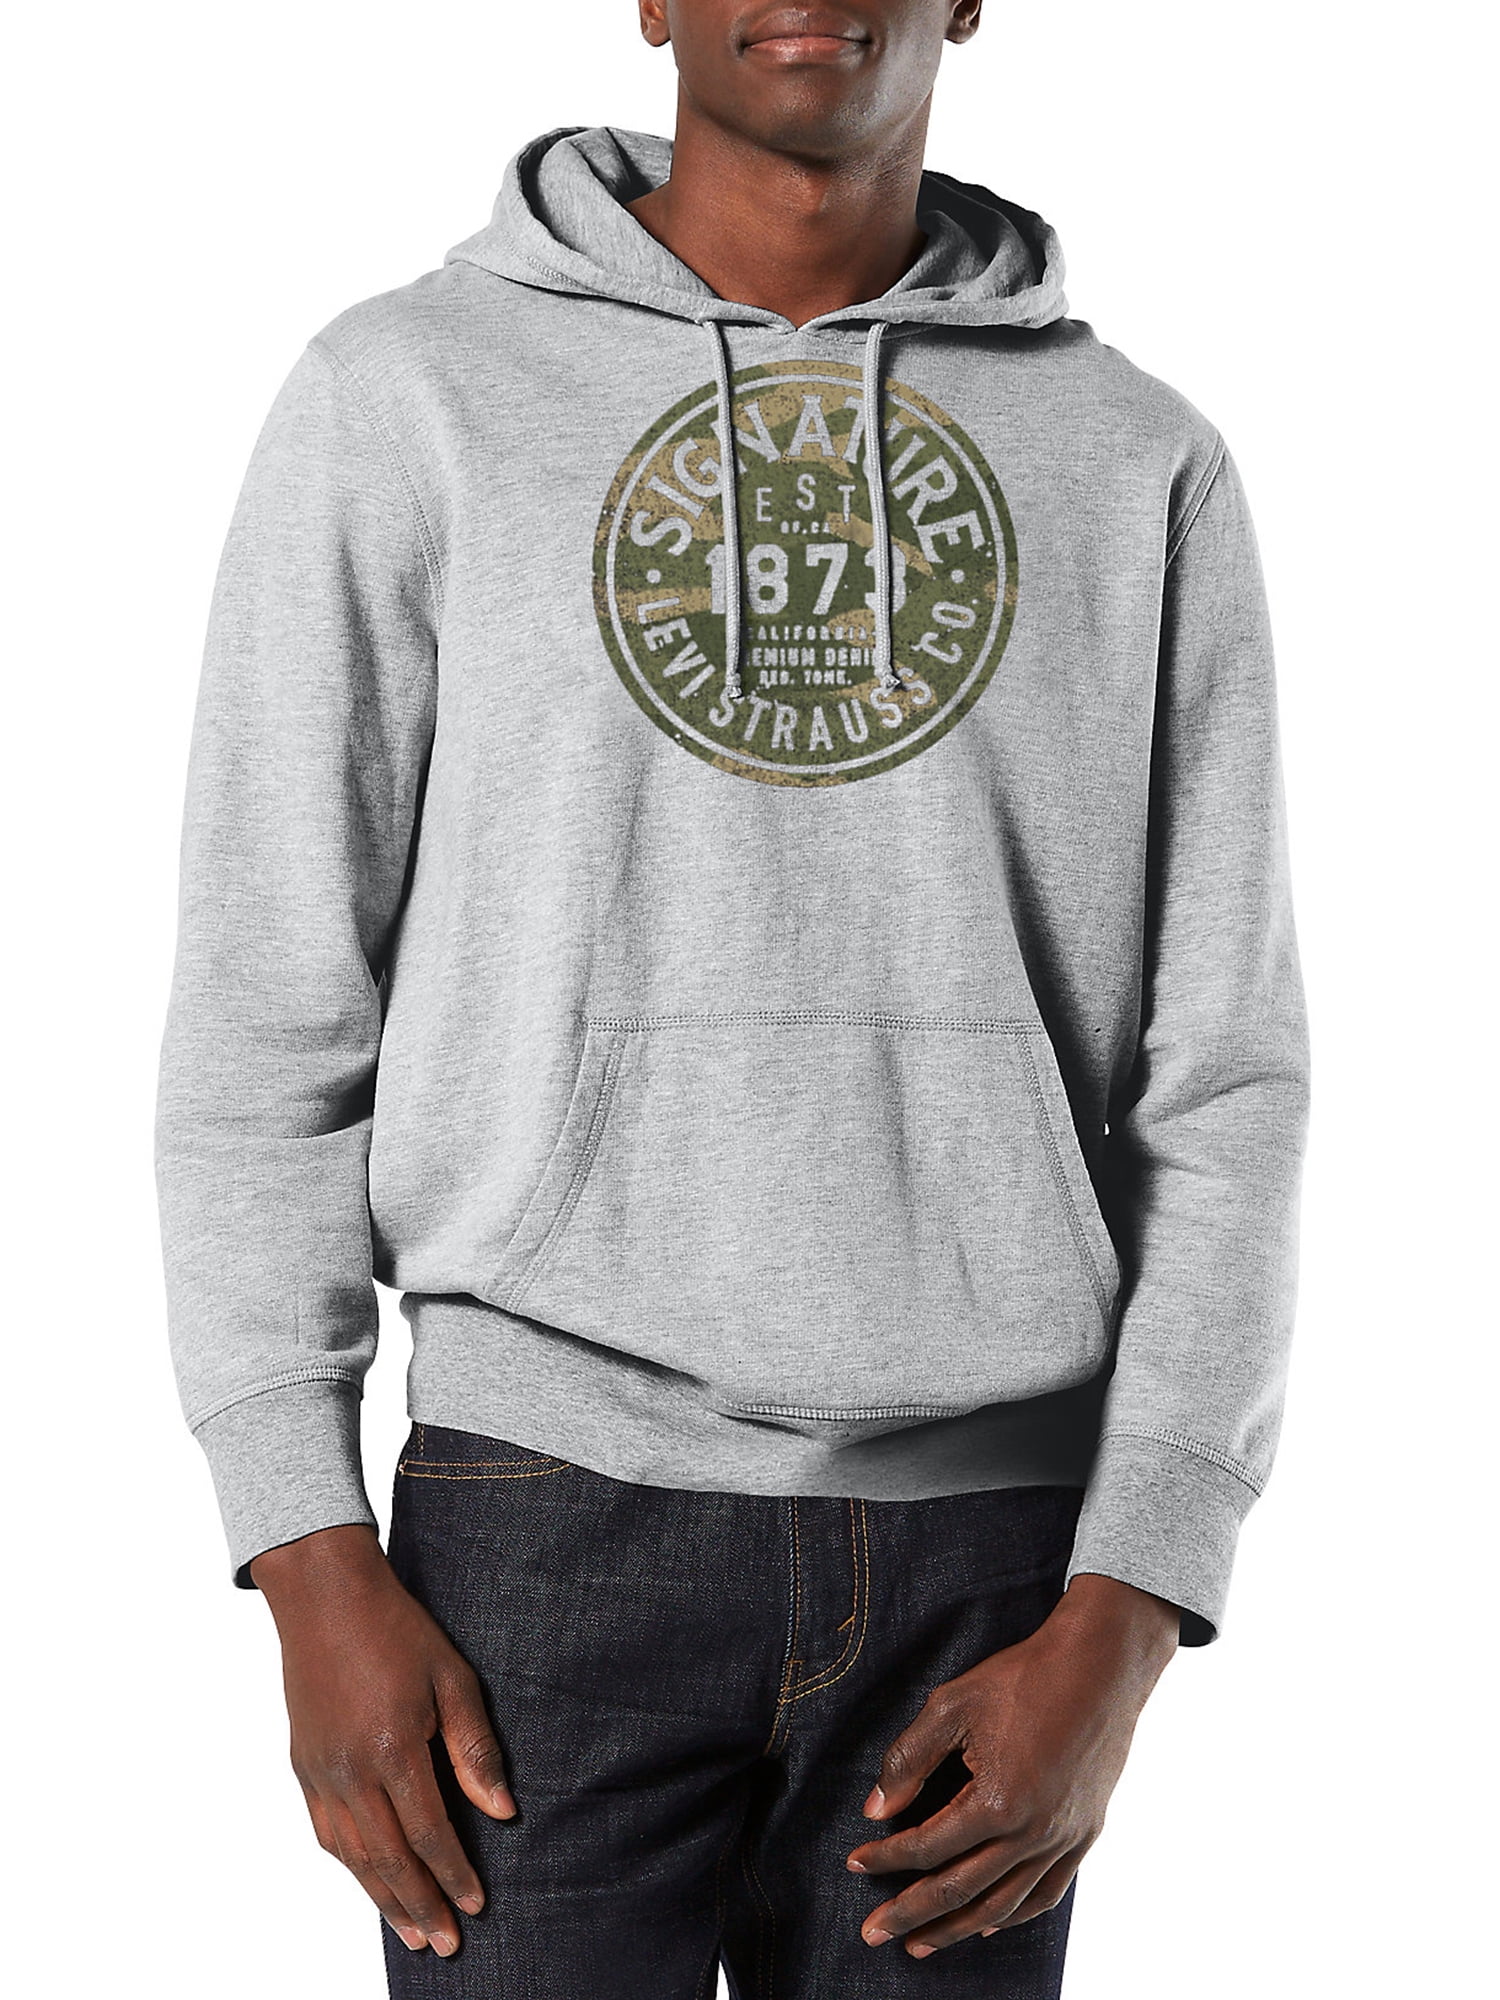 Signature by Levi Strauss & Co. Pullover Hoodie - Walmart.com